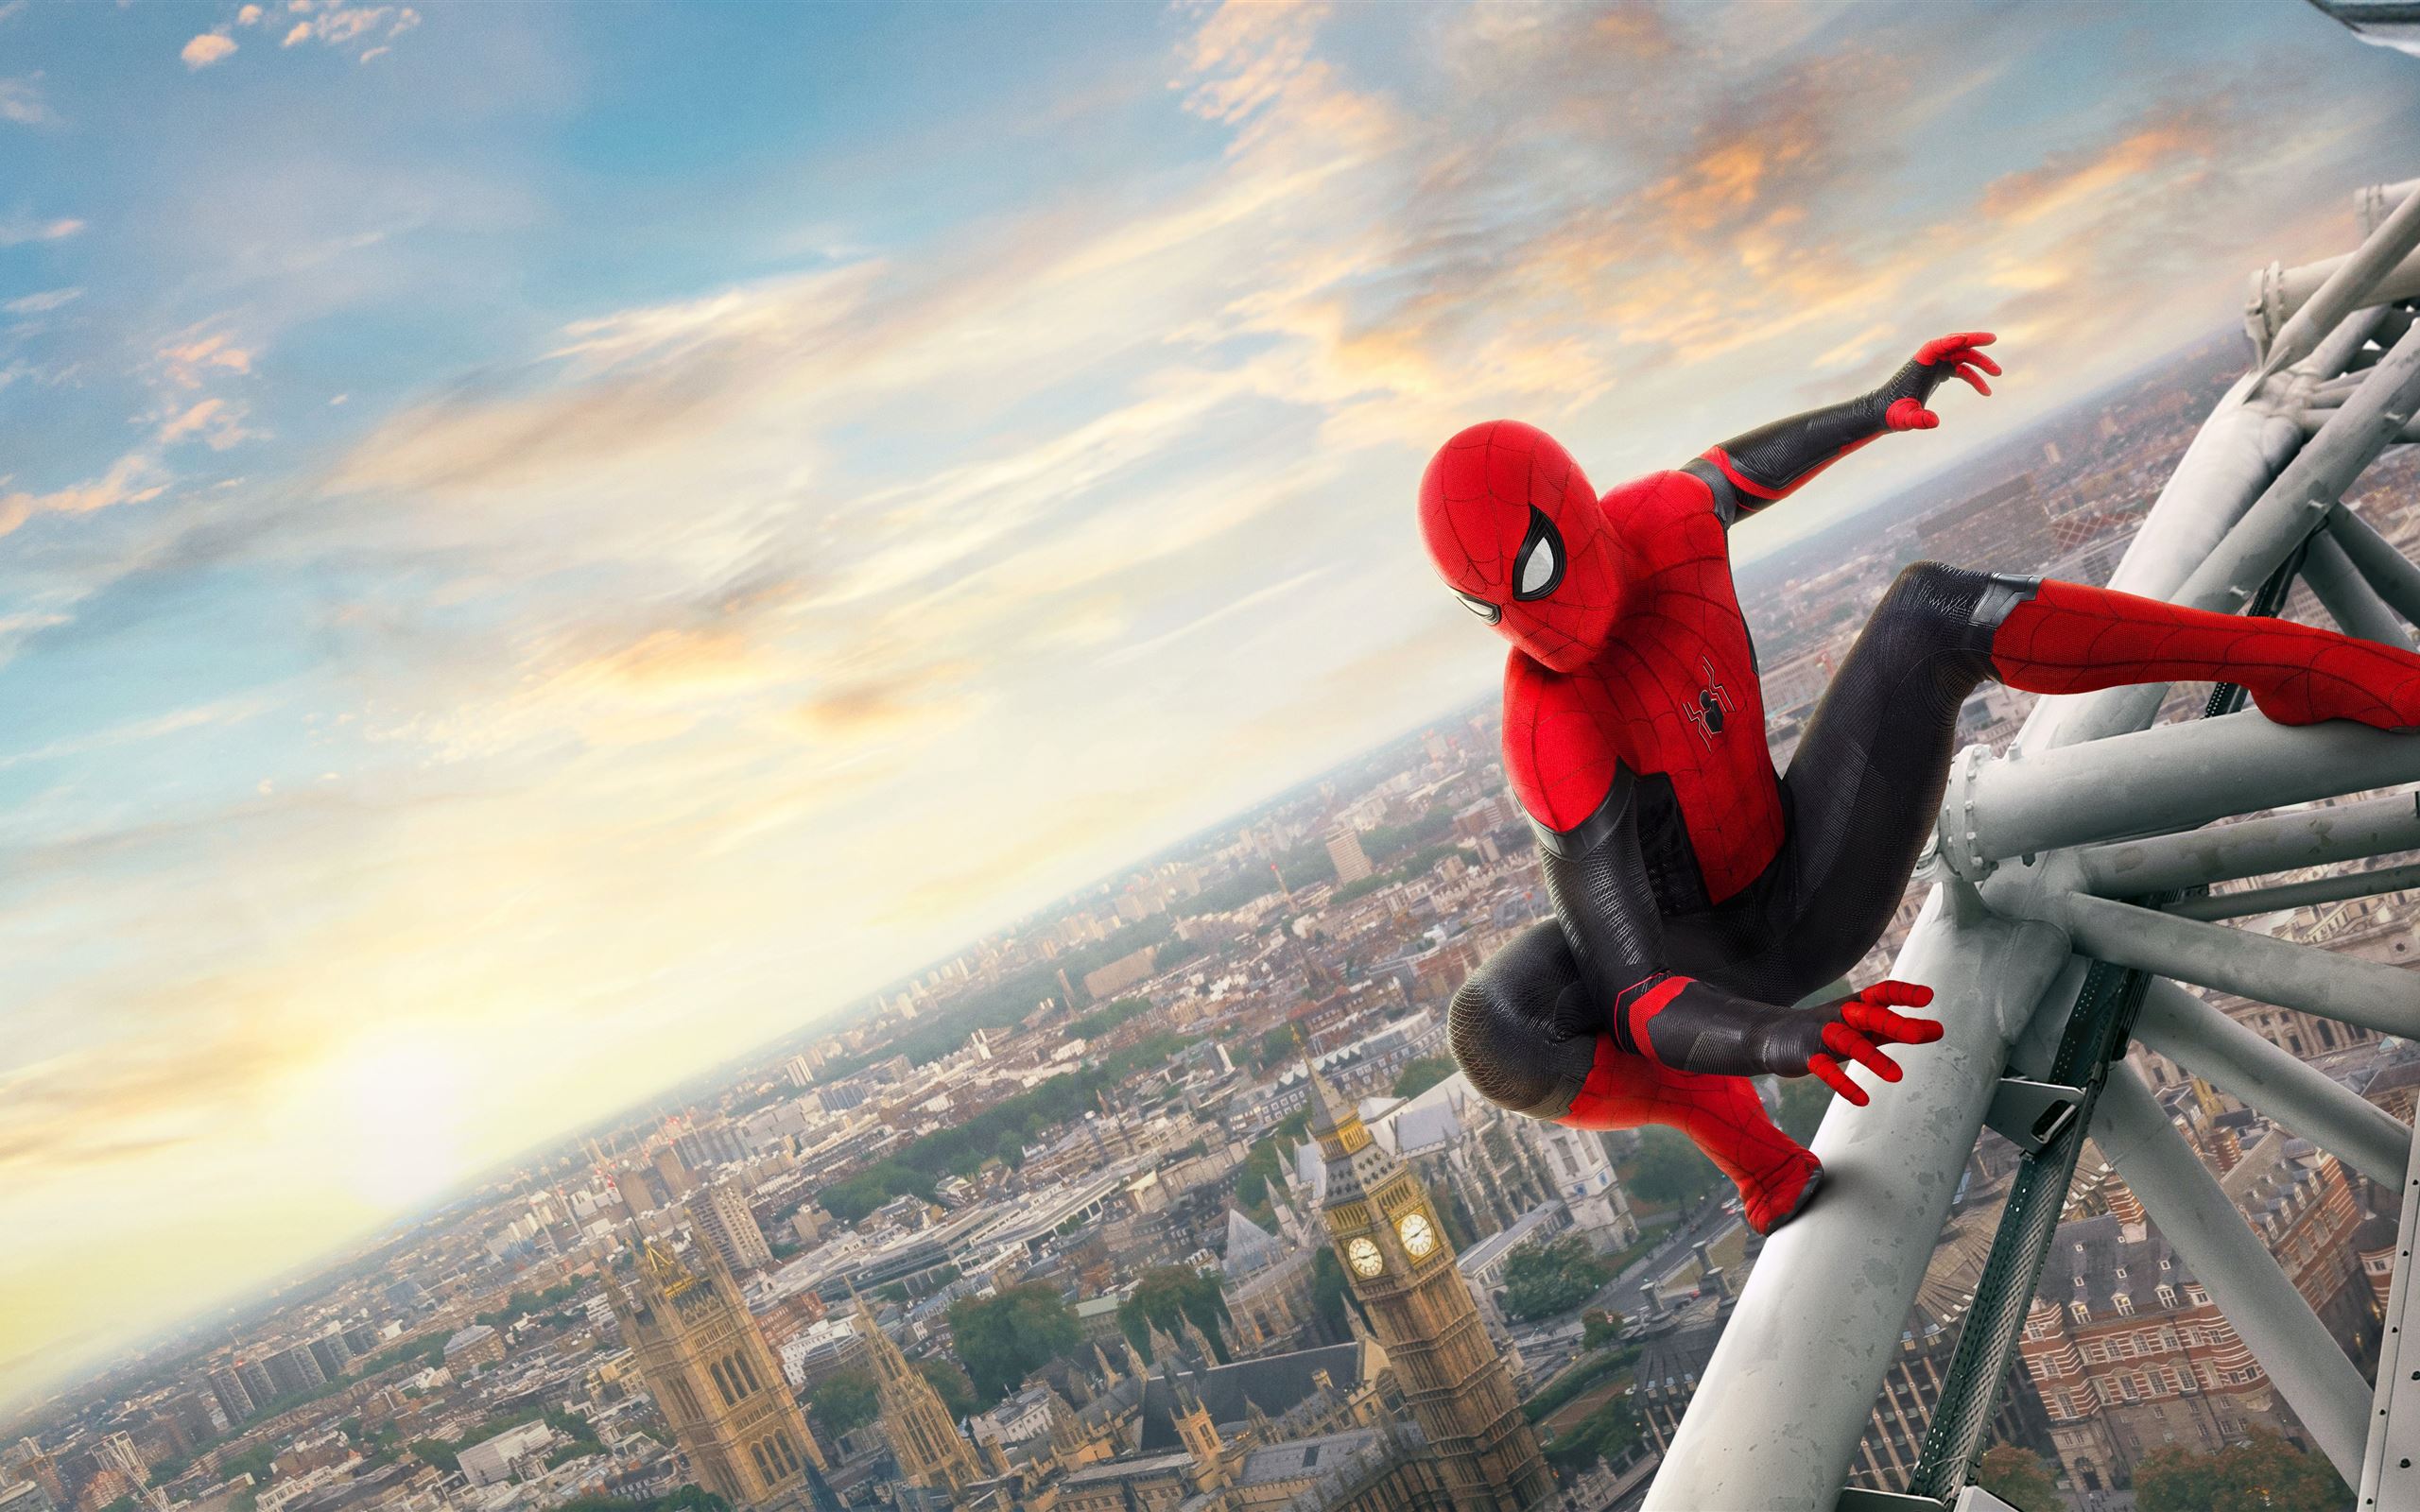 Spider-Man: Far From Home for mac instal free